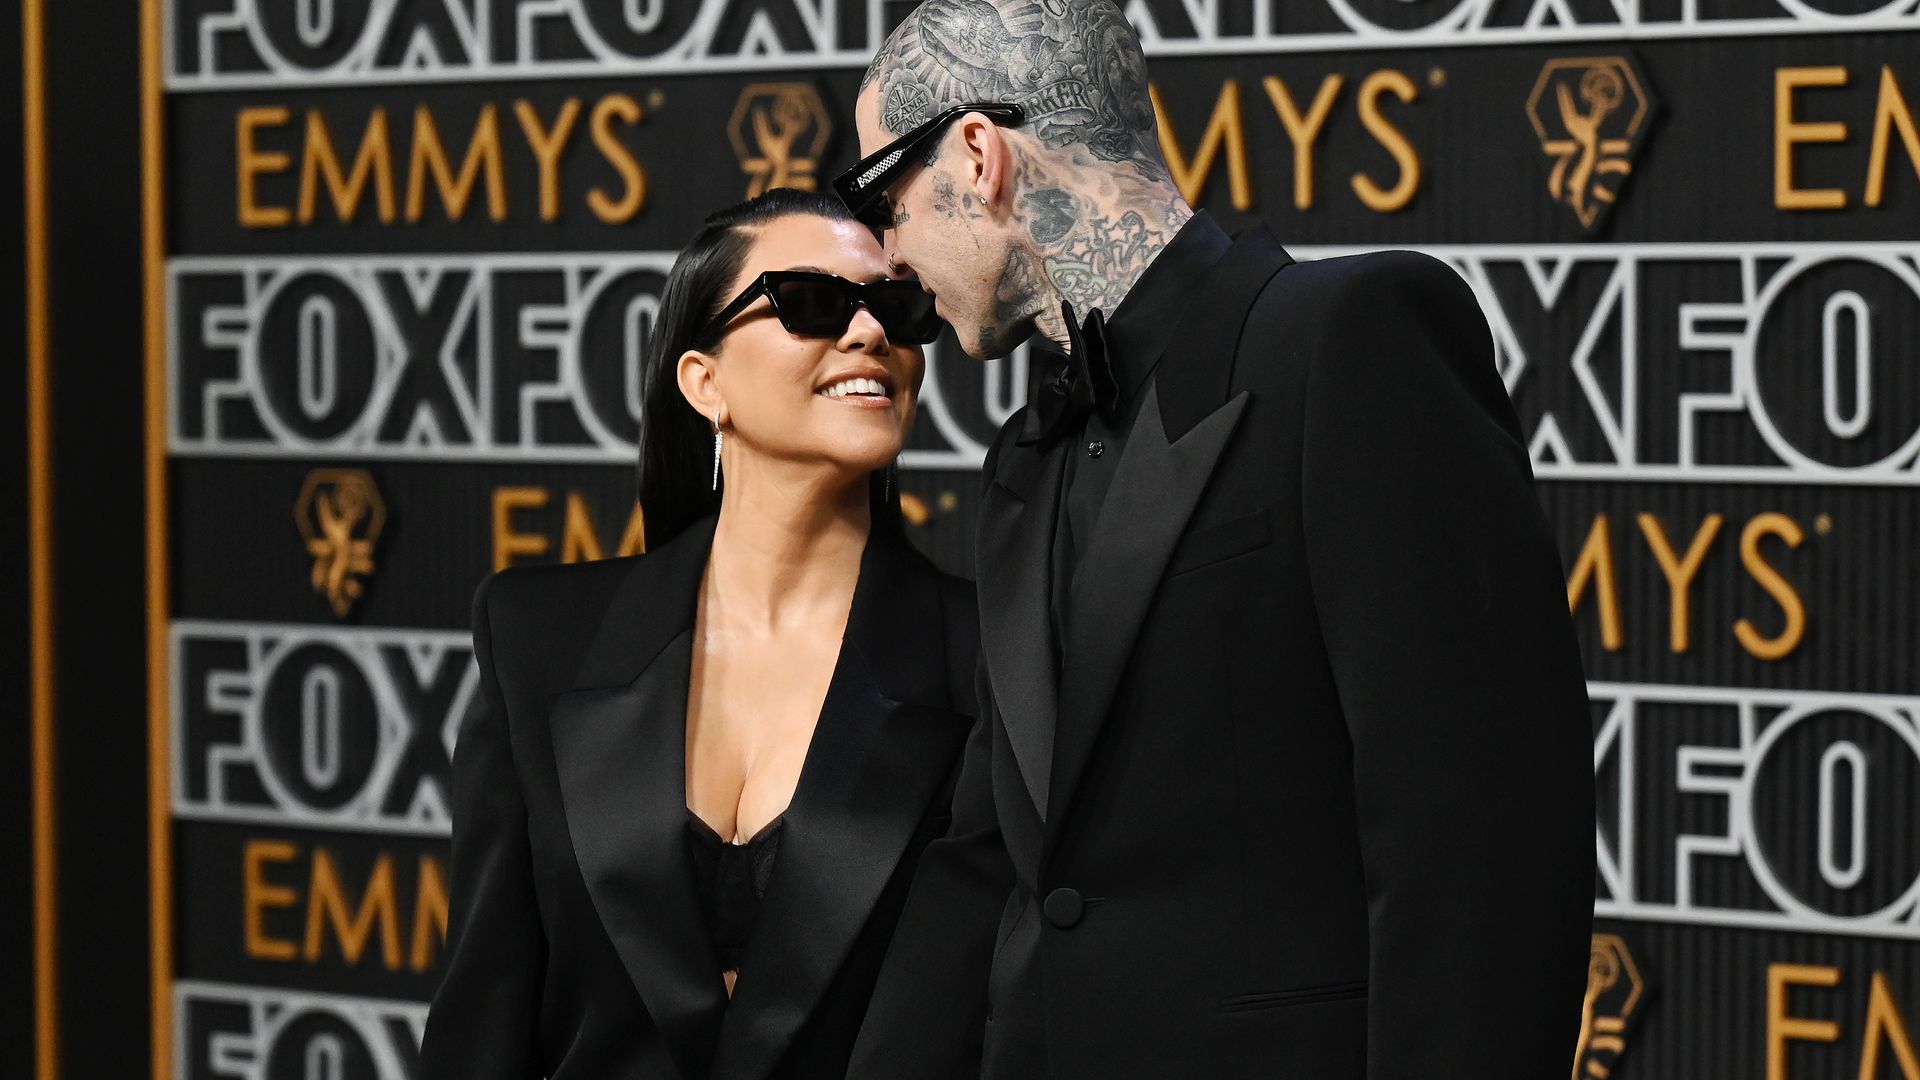 Kourtney Kardashian and Travis Barker steal the show on Emmy red carpet as star makes first appearance since birth of baby